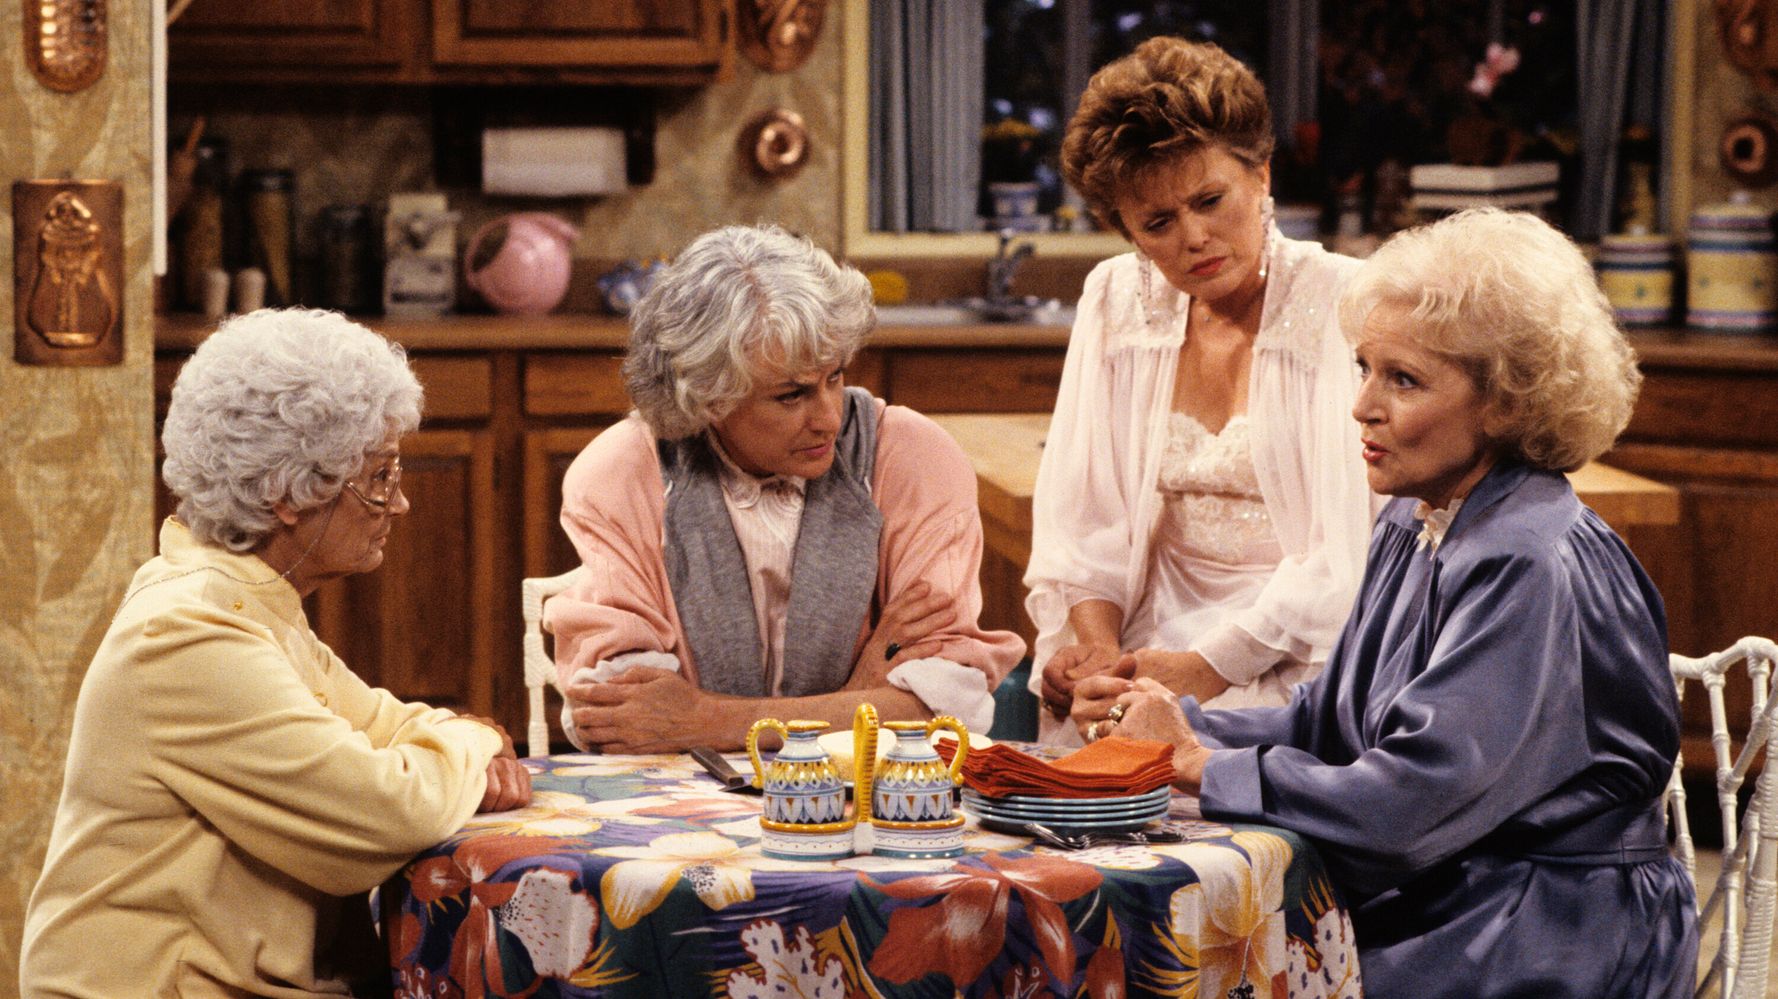 My Friends And I Are Going To Live In A 'Golden Girls'-Style Situation After We Retire